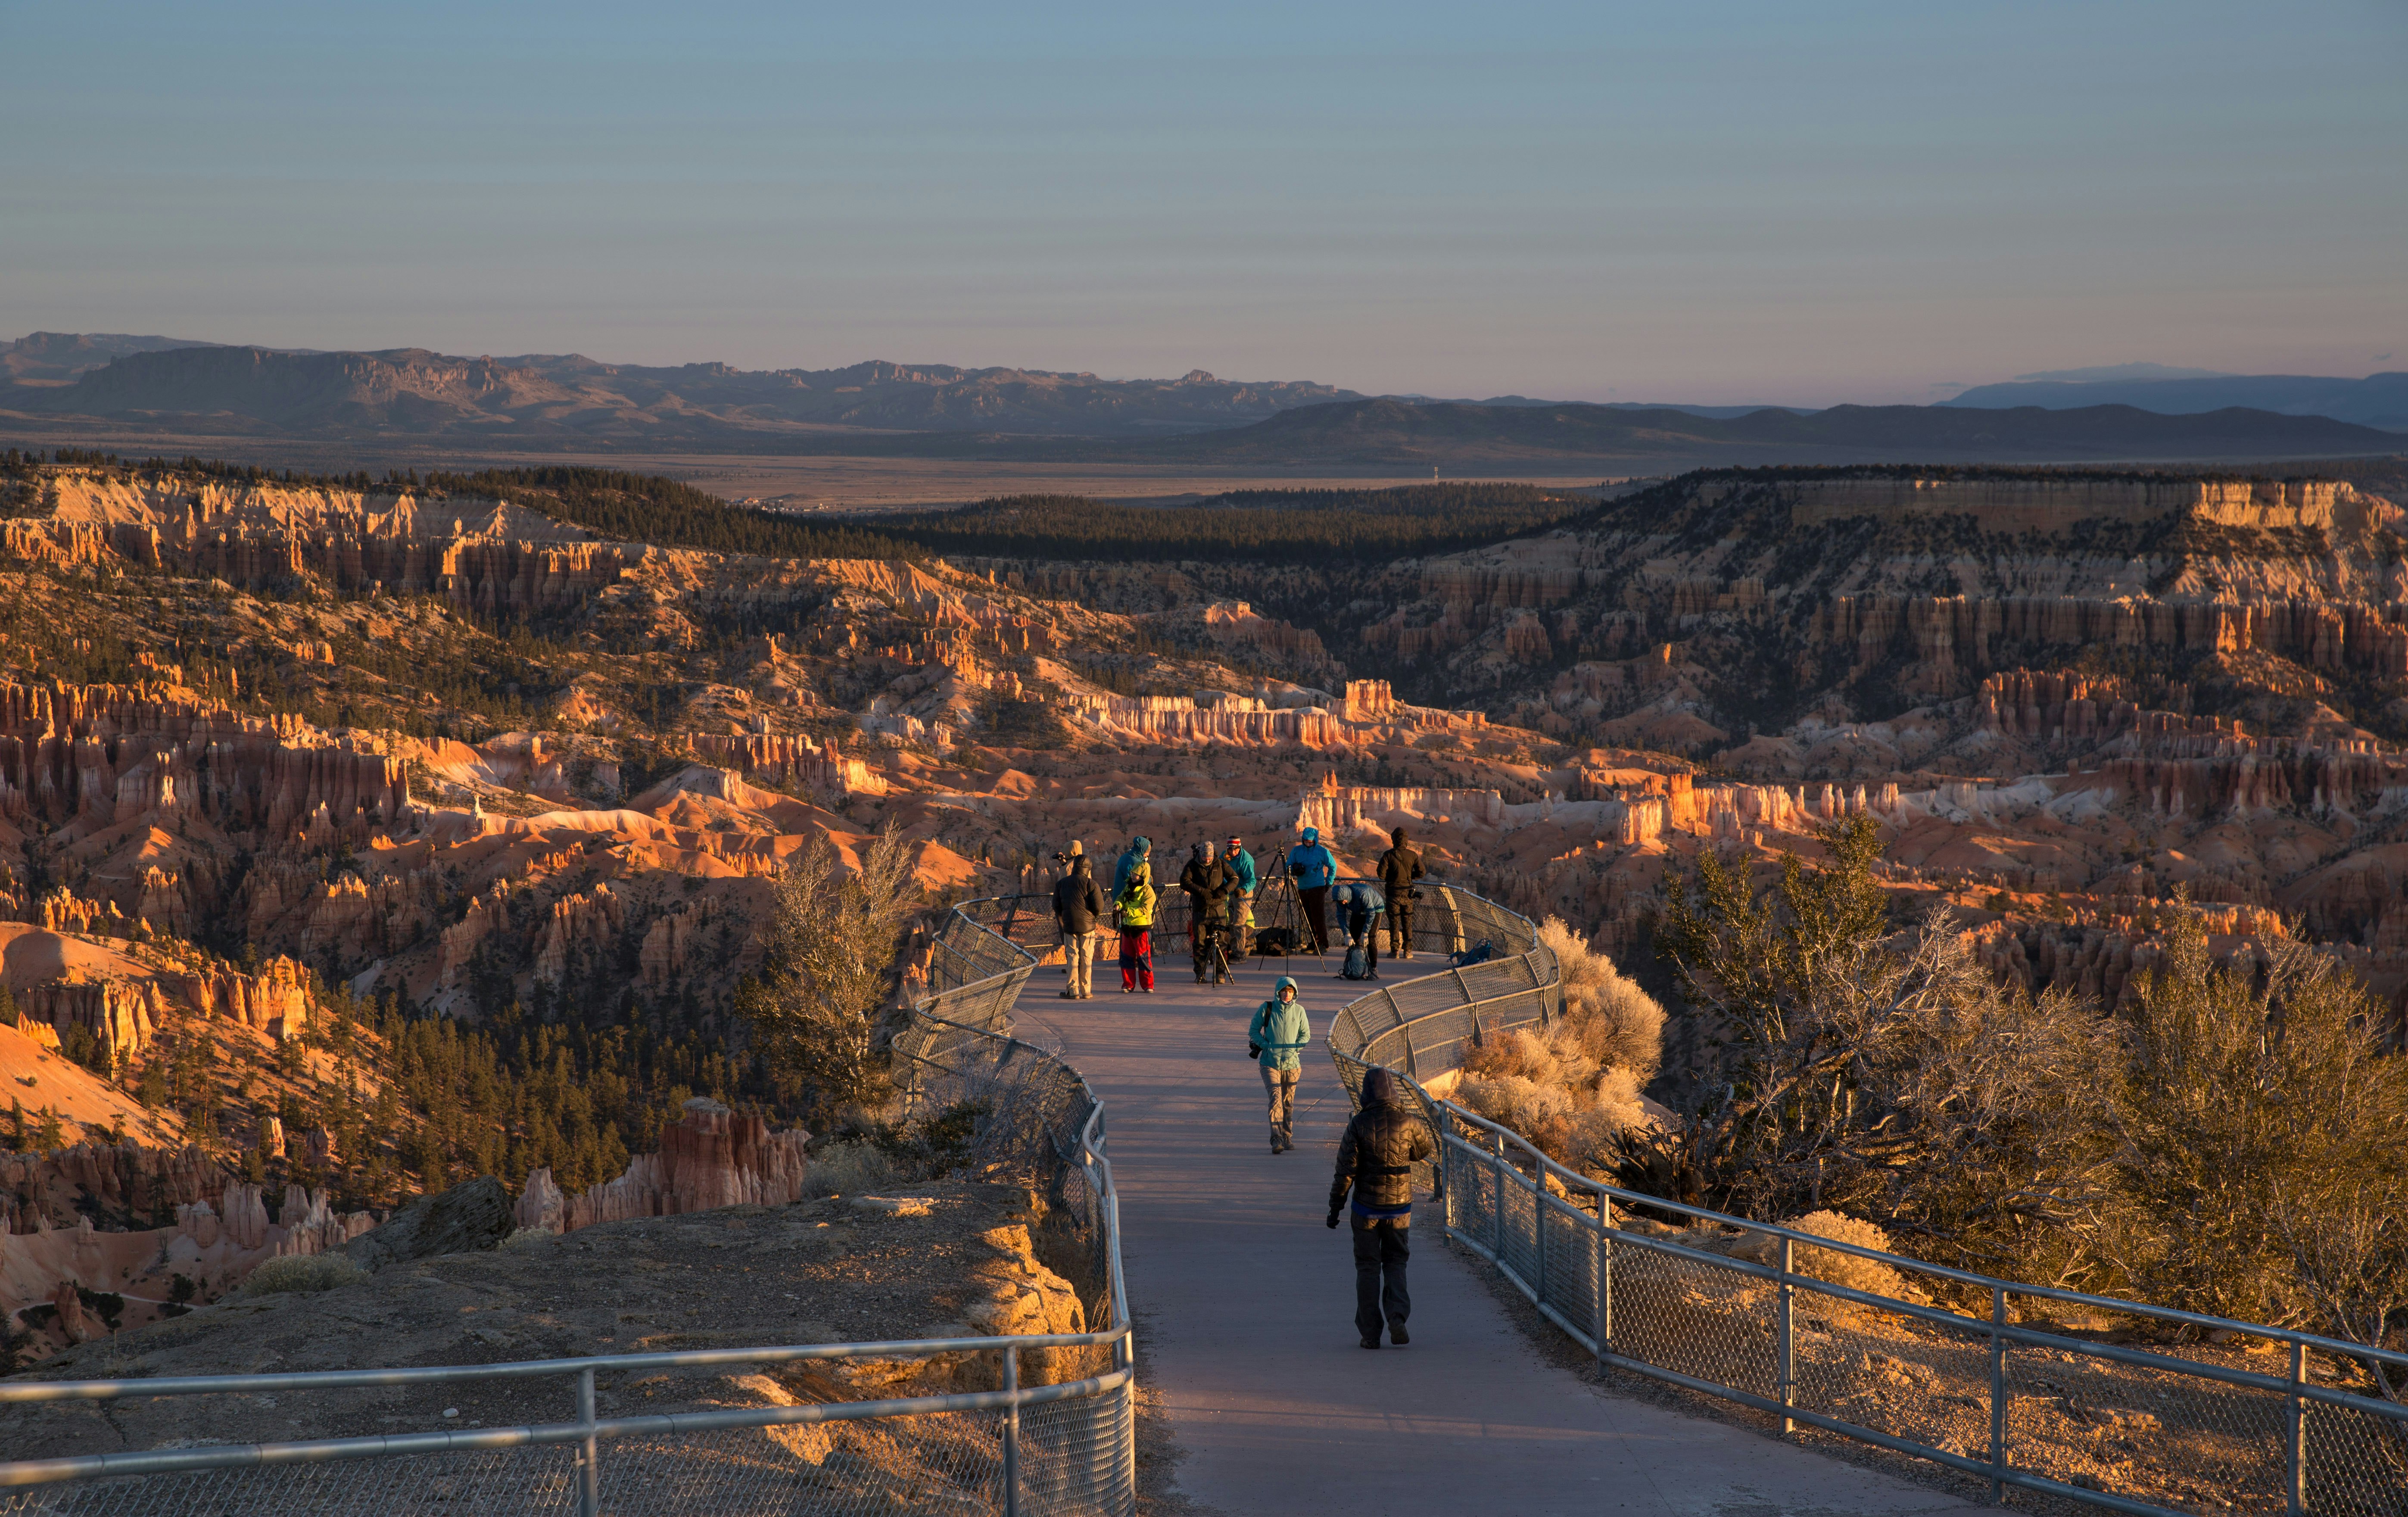 Tourists line up to take pictures of Bryce Canyon National Park at an overlook near painted desert plateaus and other rock formations